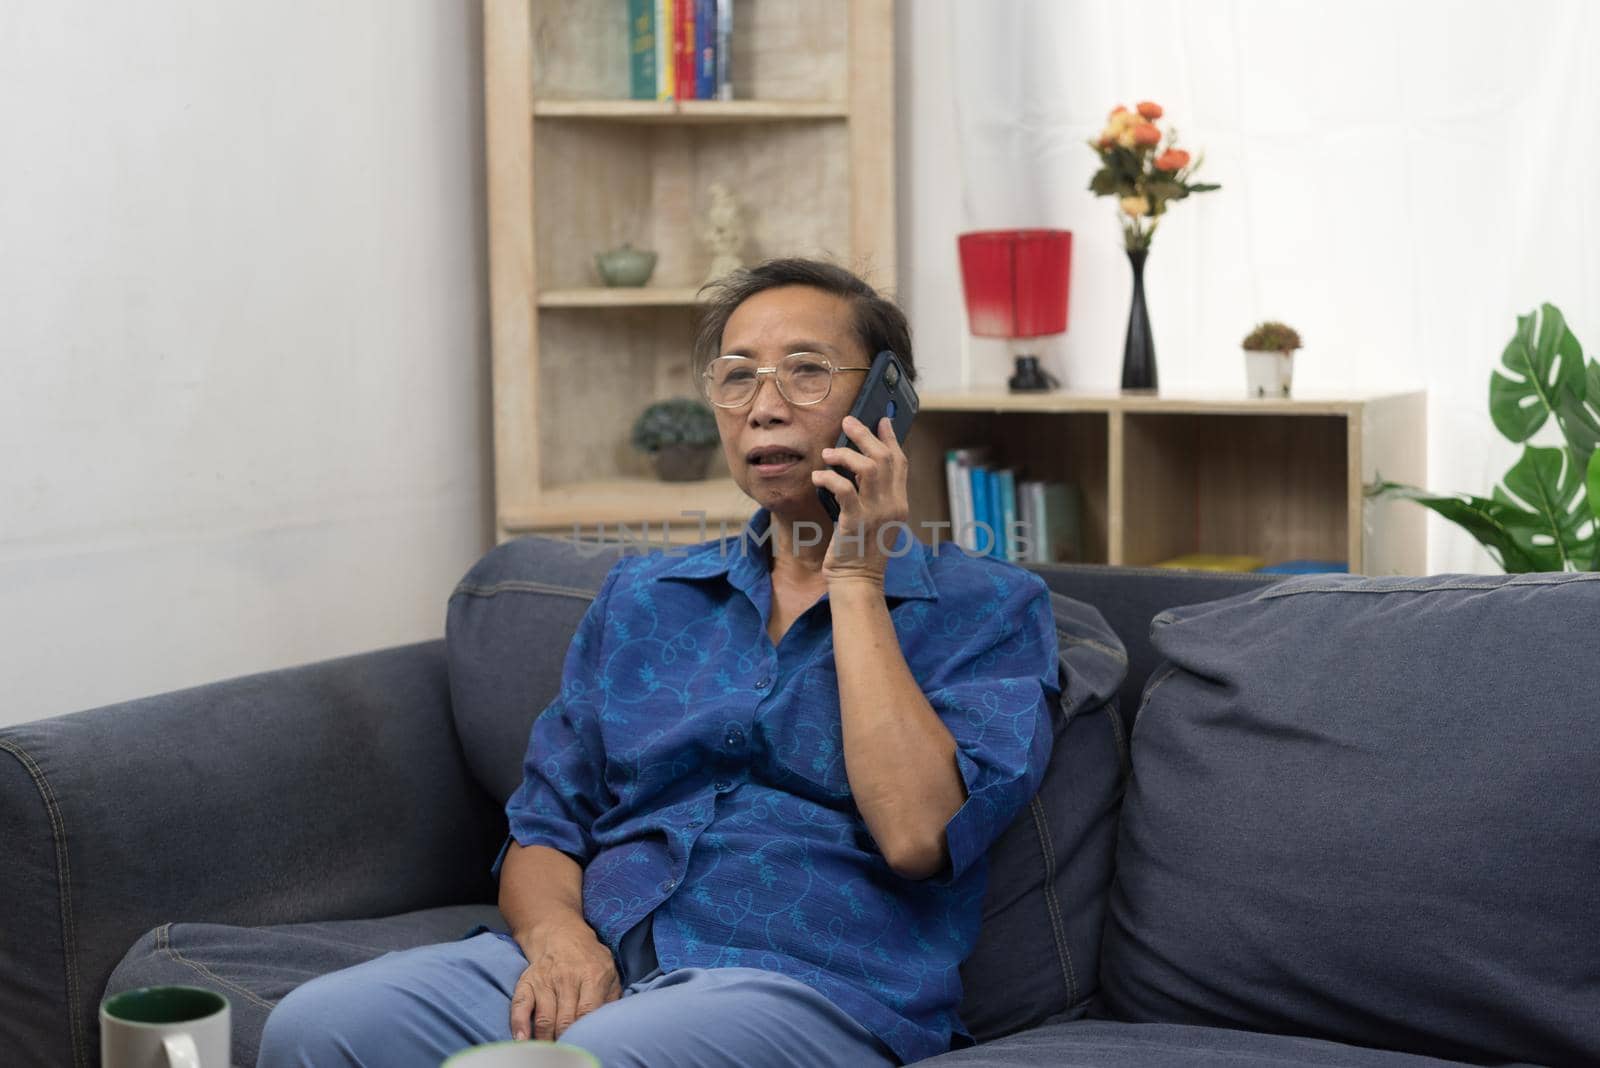 Elderly woman asian holding cell phone on sofa in home. Business communication and internet social networking technology. by aoo3771